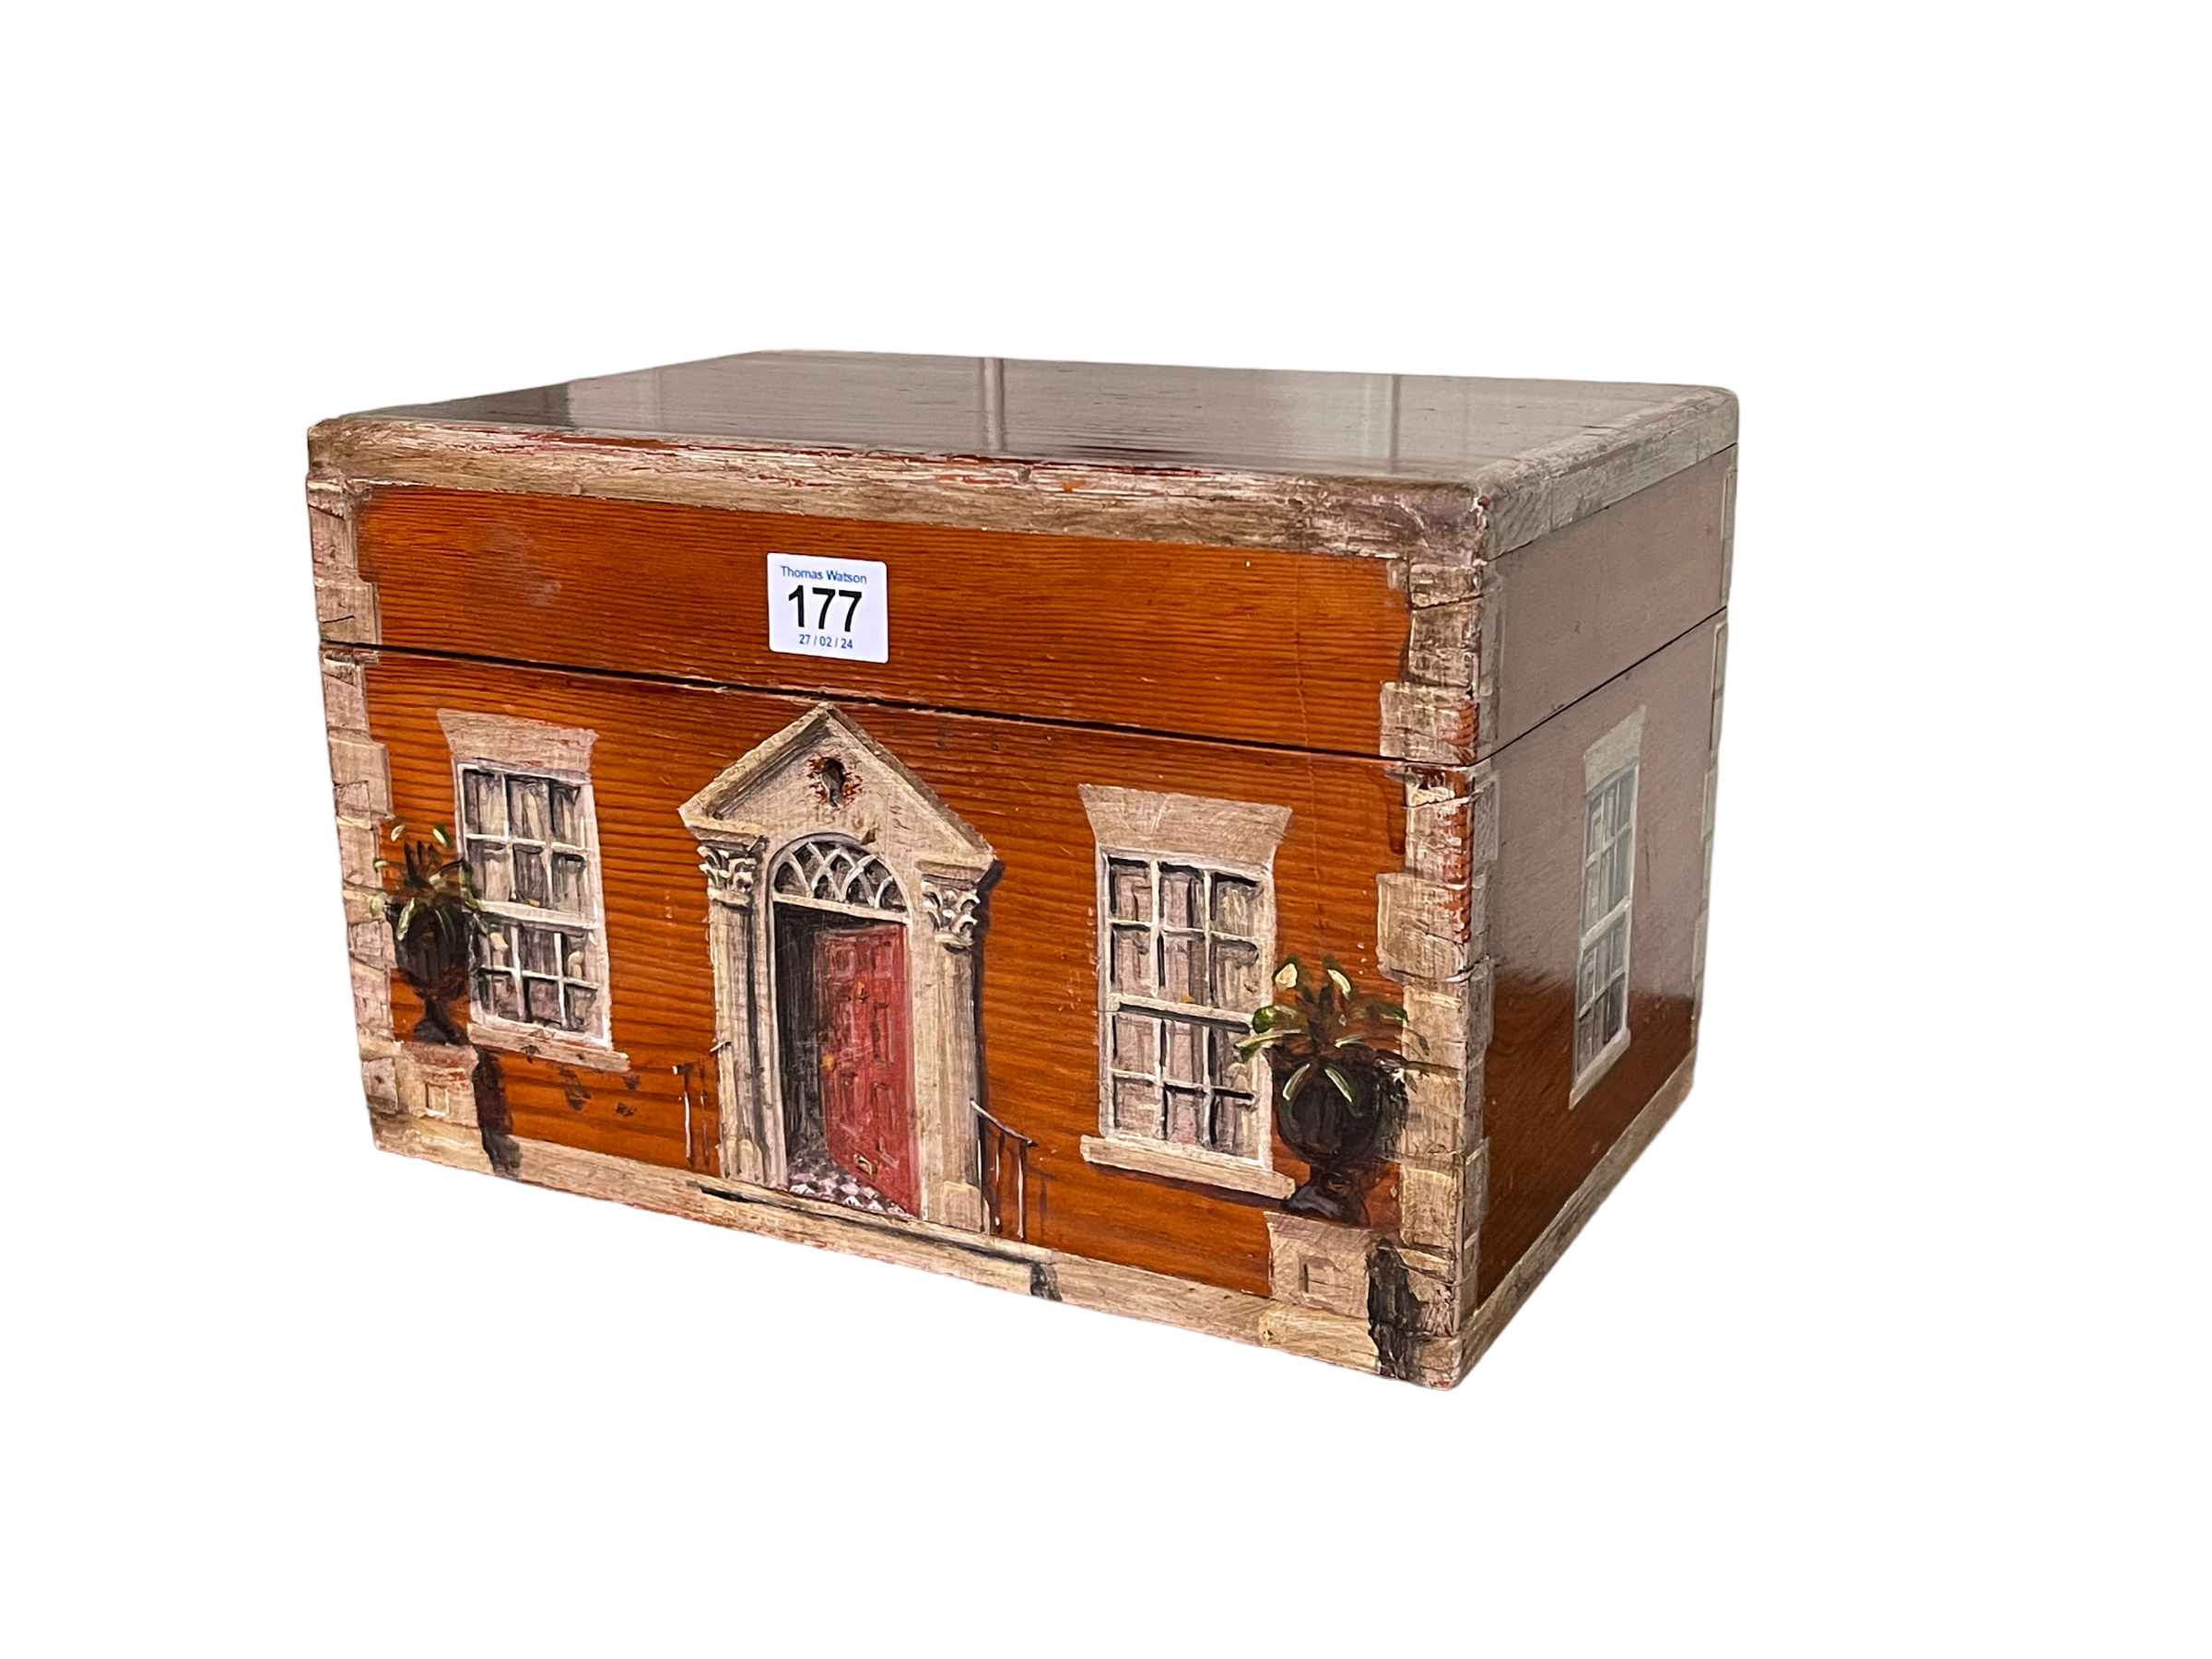 Painted pine box depicting front and two sides of a house, 31cm by 20cm by 20cm.